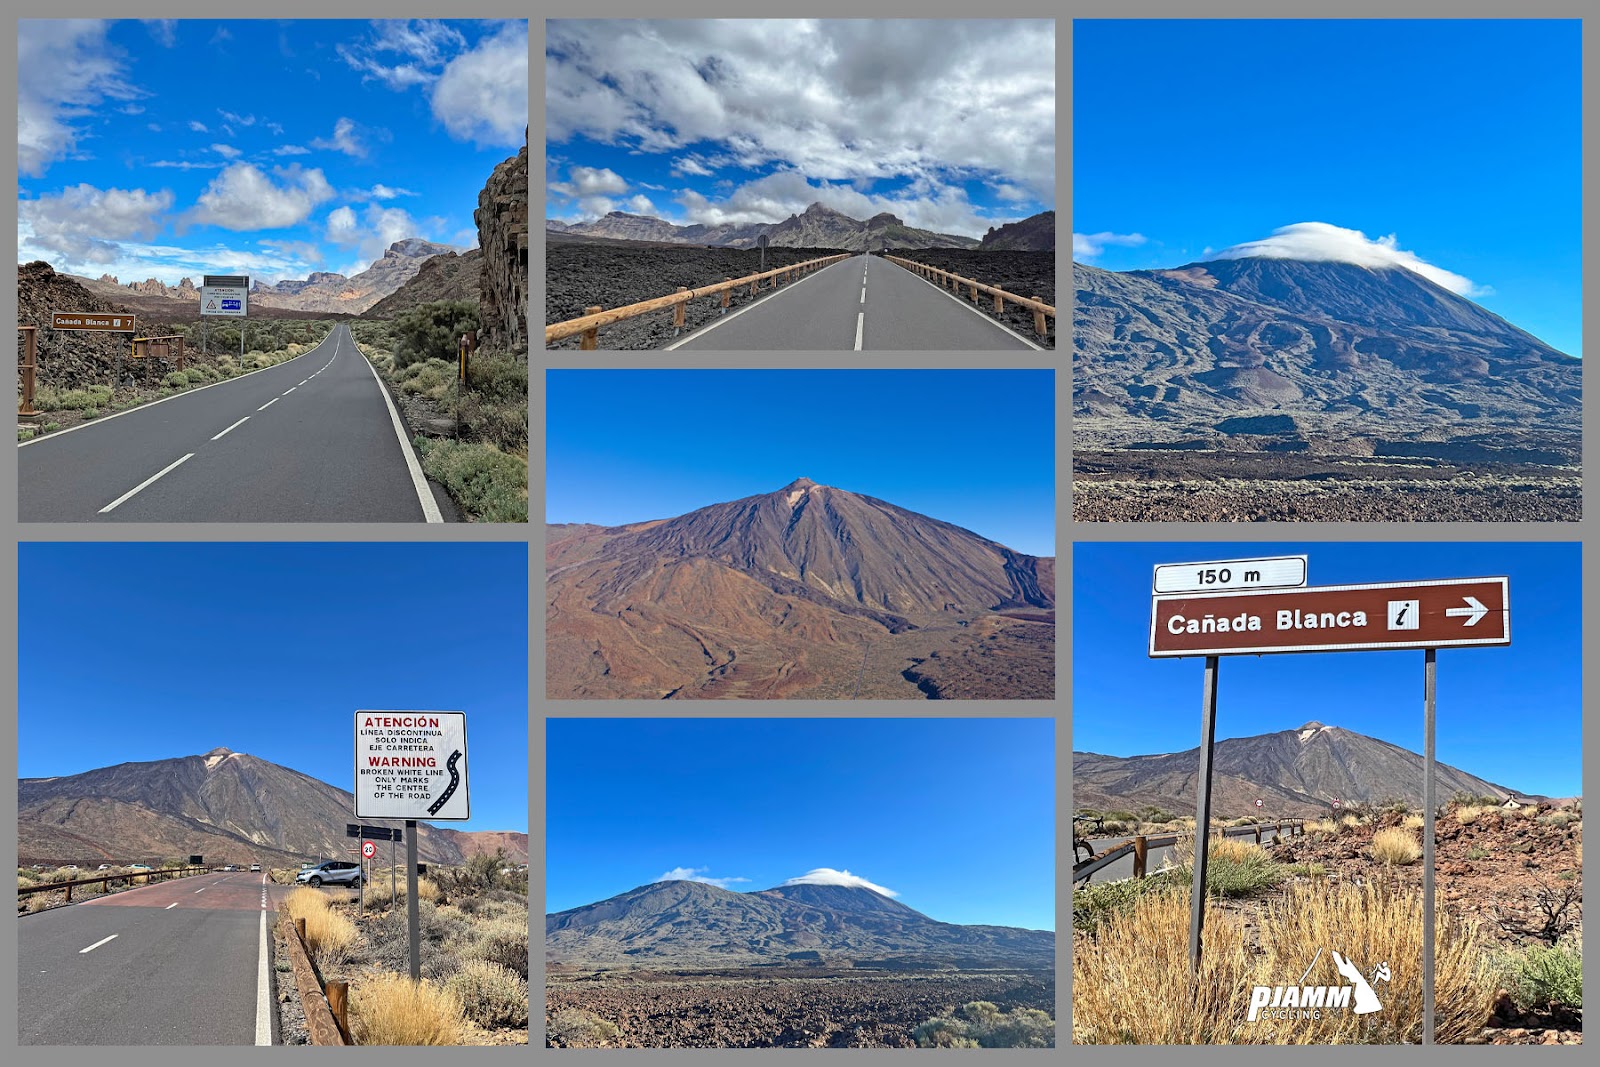 photo collage shows highway and mountain formations between climb's finish and the visitor center; sign for Canada Blanca